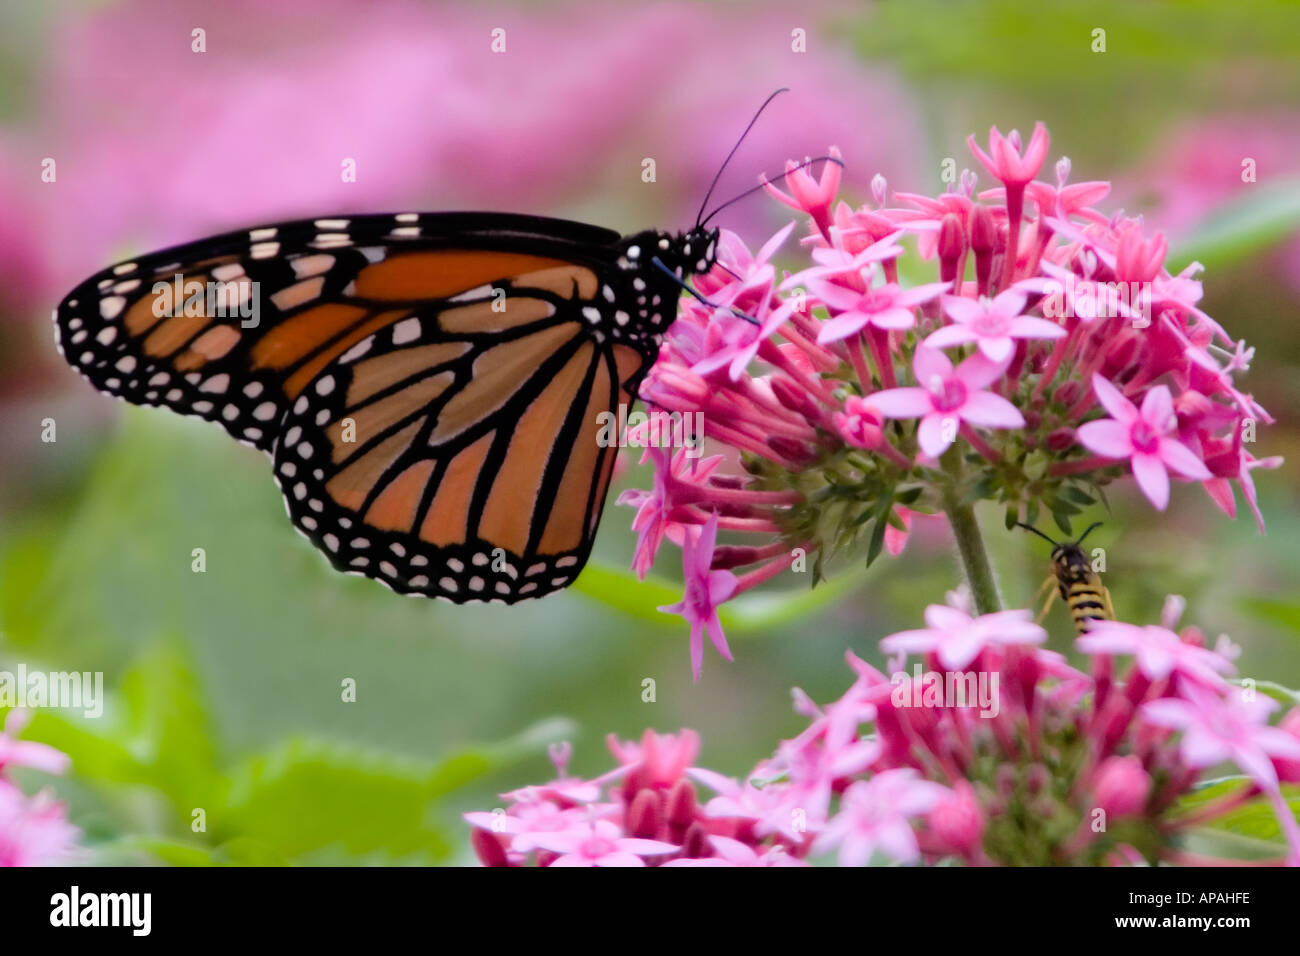 Monarch butterfly on pink flower with bee in background Stock Photo